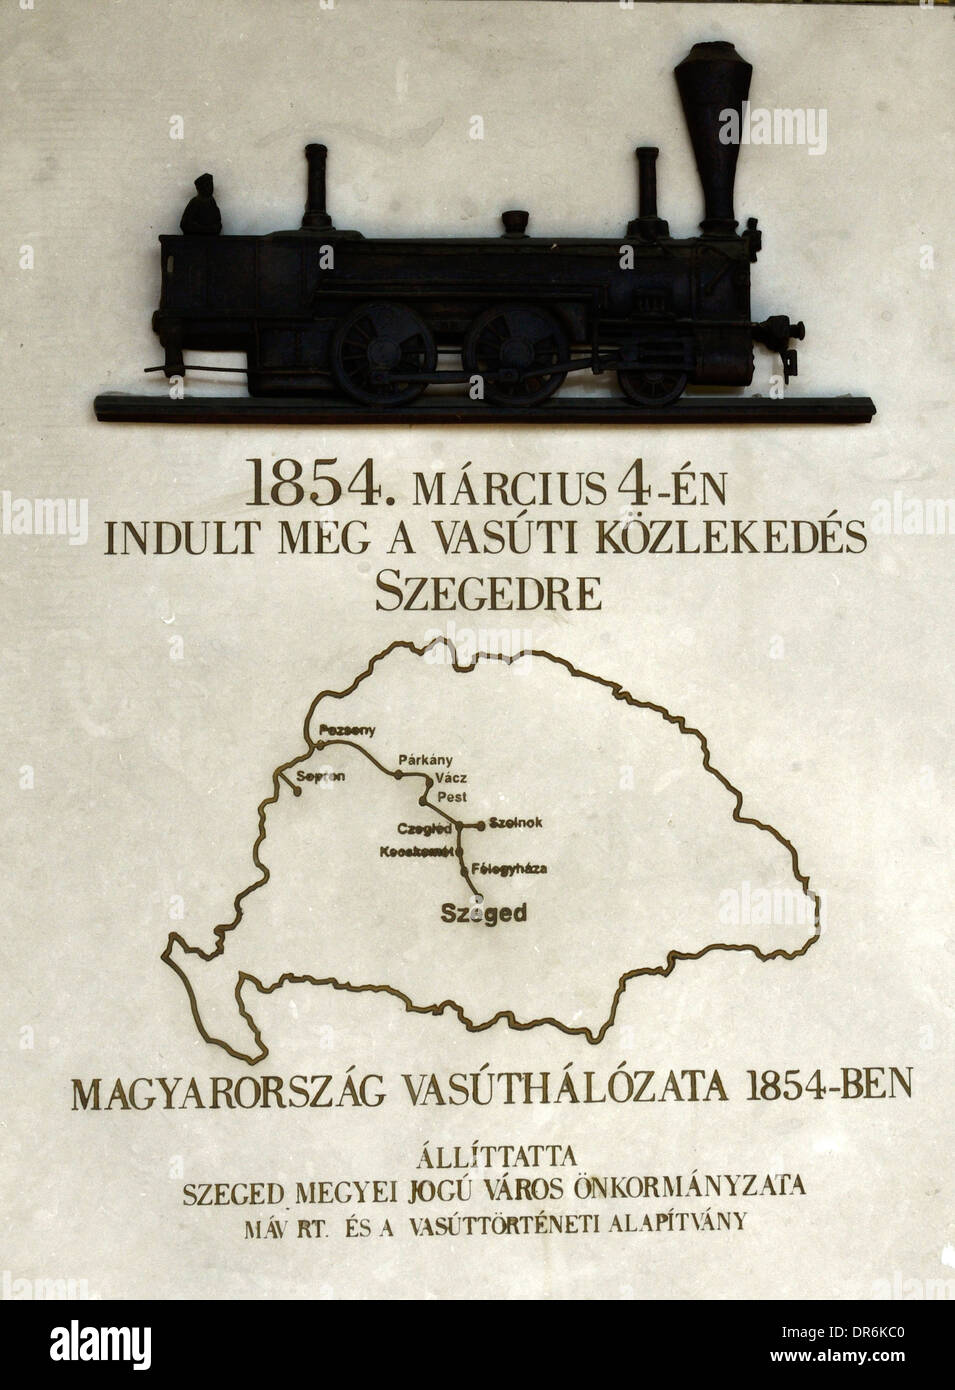 Railway station Szeged Hungary memorial plaque Hungarian railway network in 1854 Stock Photo